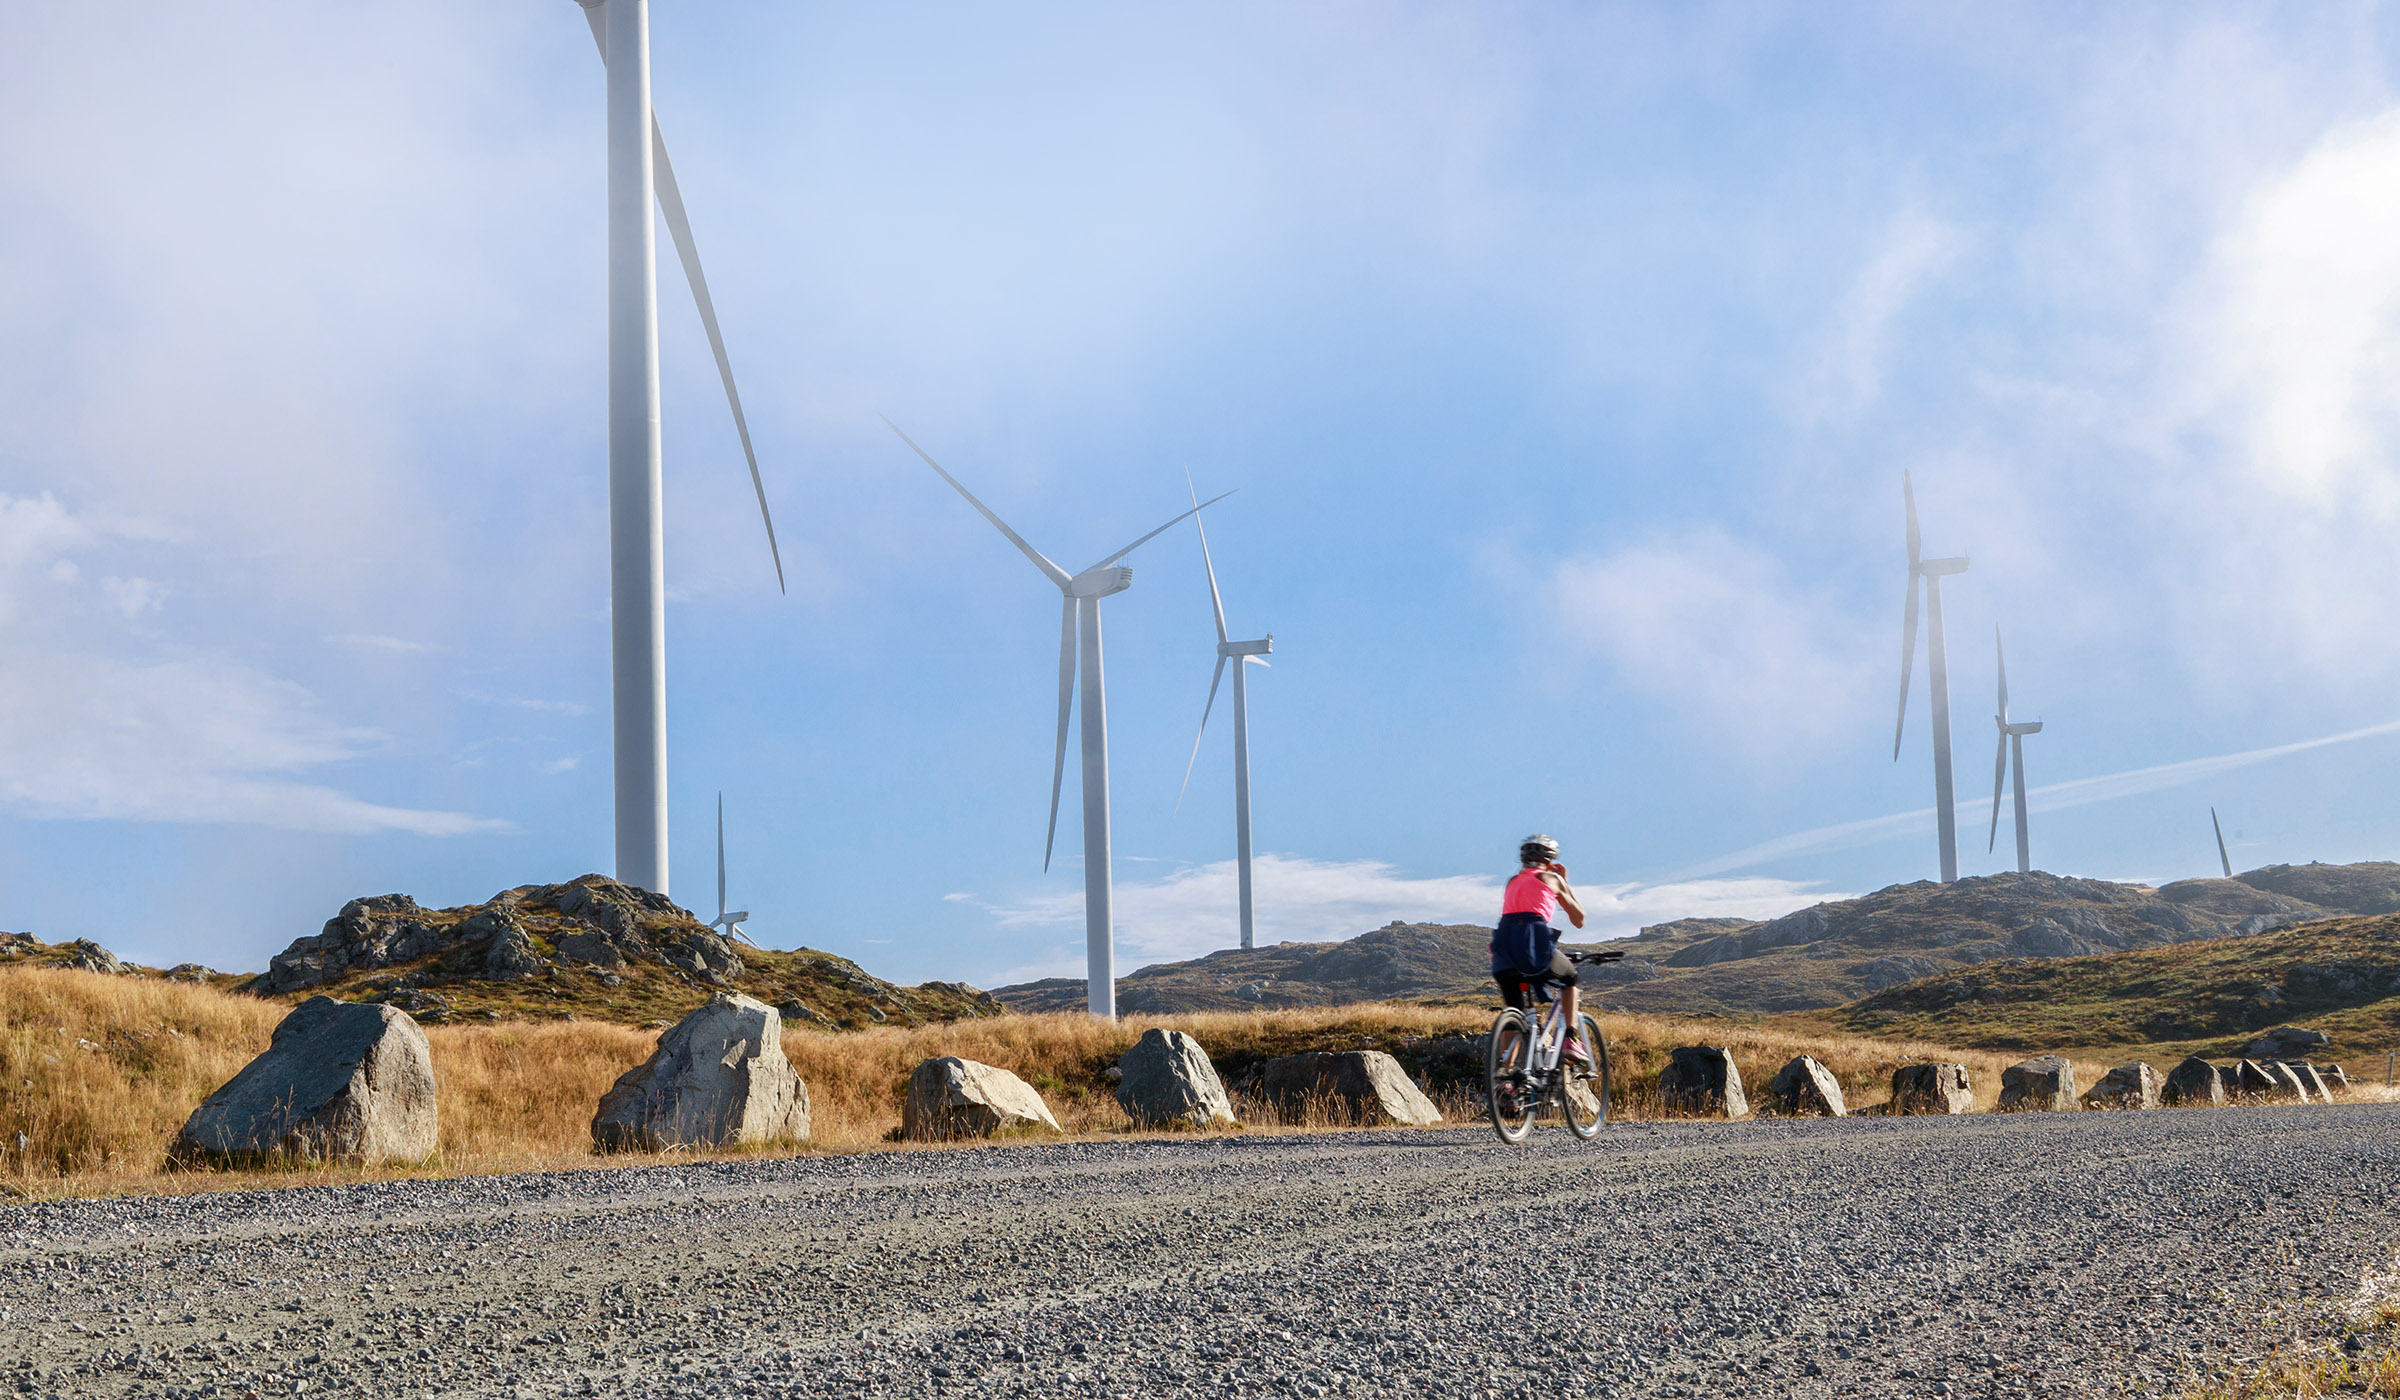 Woman cycling on gravel path with hills and windmills in background.